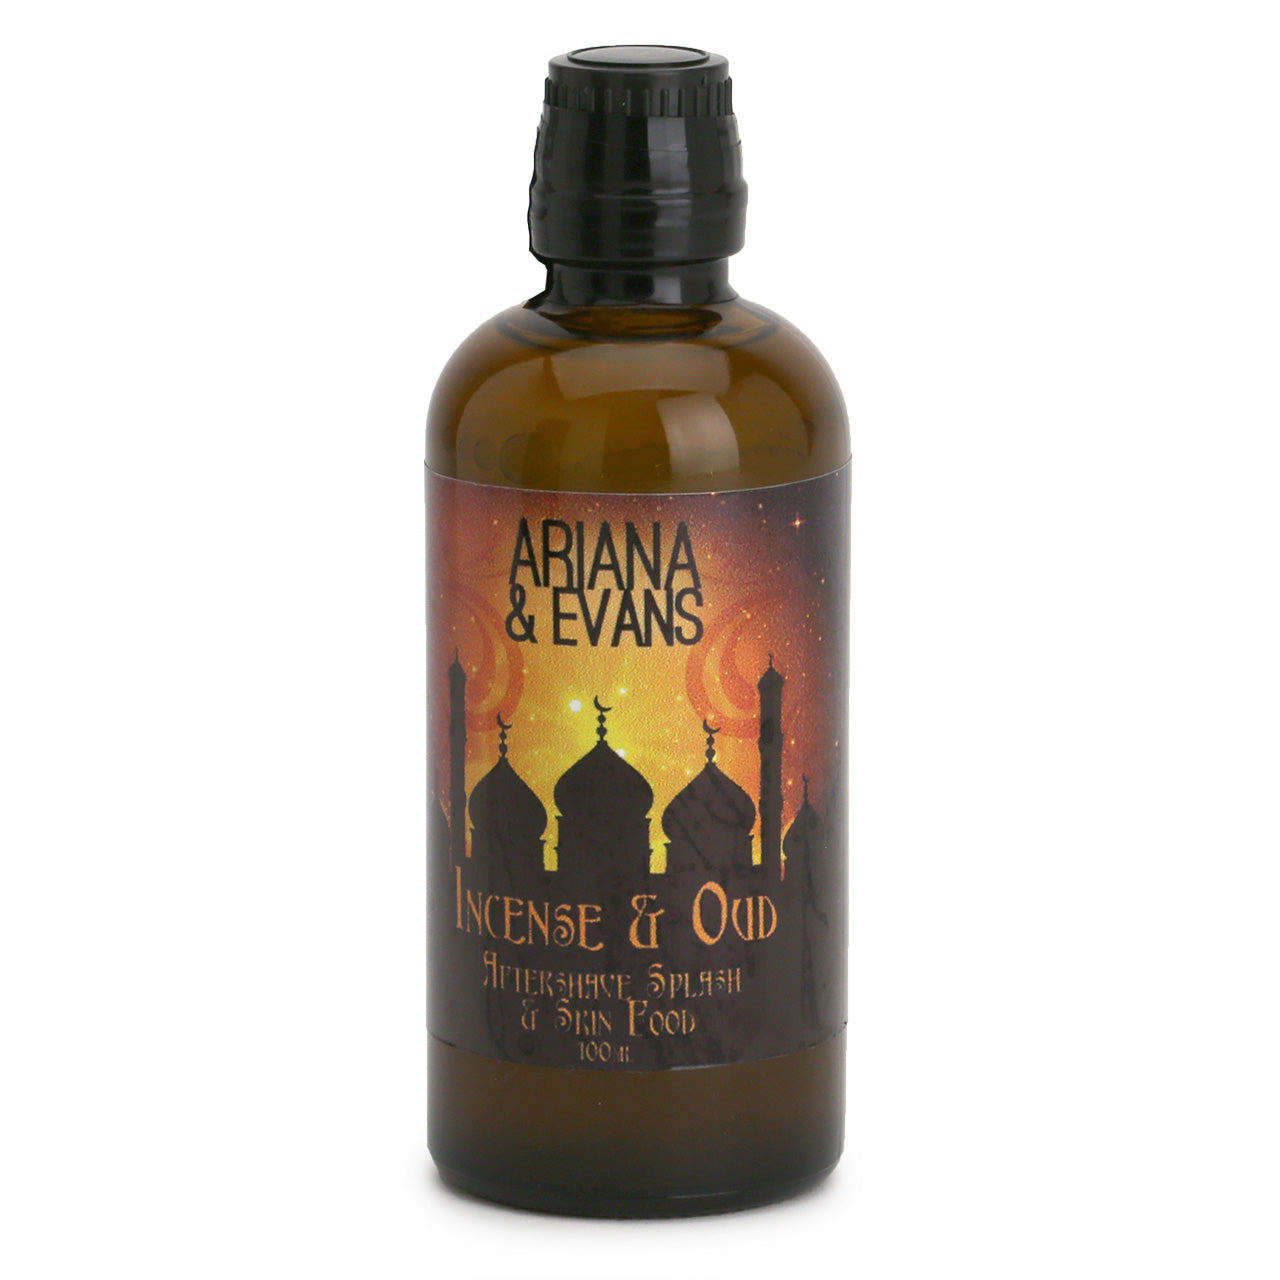 Incense & Oud After Shave Splash Skin Food from Ariana & Evans showing the three black minarets in front of an orange and yellow sky 